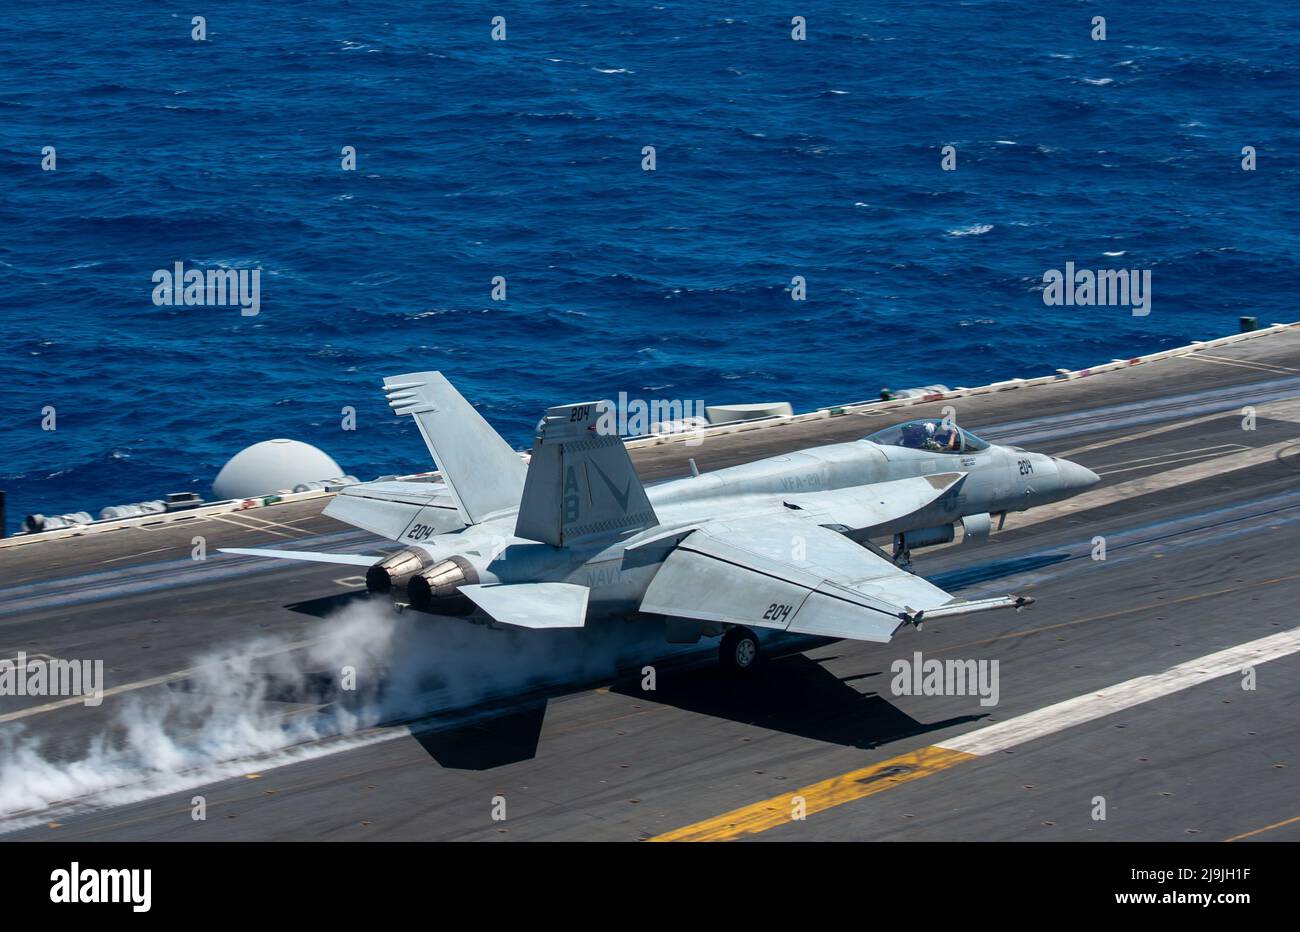 220520-N-BP862-1088 MEDITERRANEAN SEA (May 20, 2022) An F/A-18E Super Hornet, attached to the “Fighting Checkmates” of Strike Fighter Squadron (VFA) 211, launches from the flight deck of the Nimitz-class aircraft carrier USS Harry S. Truman (CVN 75) in support of Mare Aperto 22-1/Italian MINEX 22, May 20, 2022. Mare Aperto 22-1/Italian MINEX 22 is a joint and combined high end exercise sponsored by the Italian navy aimed at strengthening and enhancing the combat readiness of participating forces in maritime and amphibious operations. (U.S. Navy photo by Mass Communication Specialist 3rd Class Stock Photo